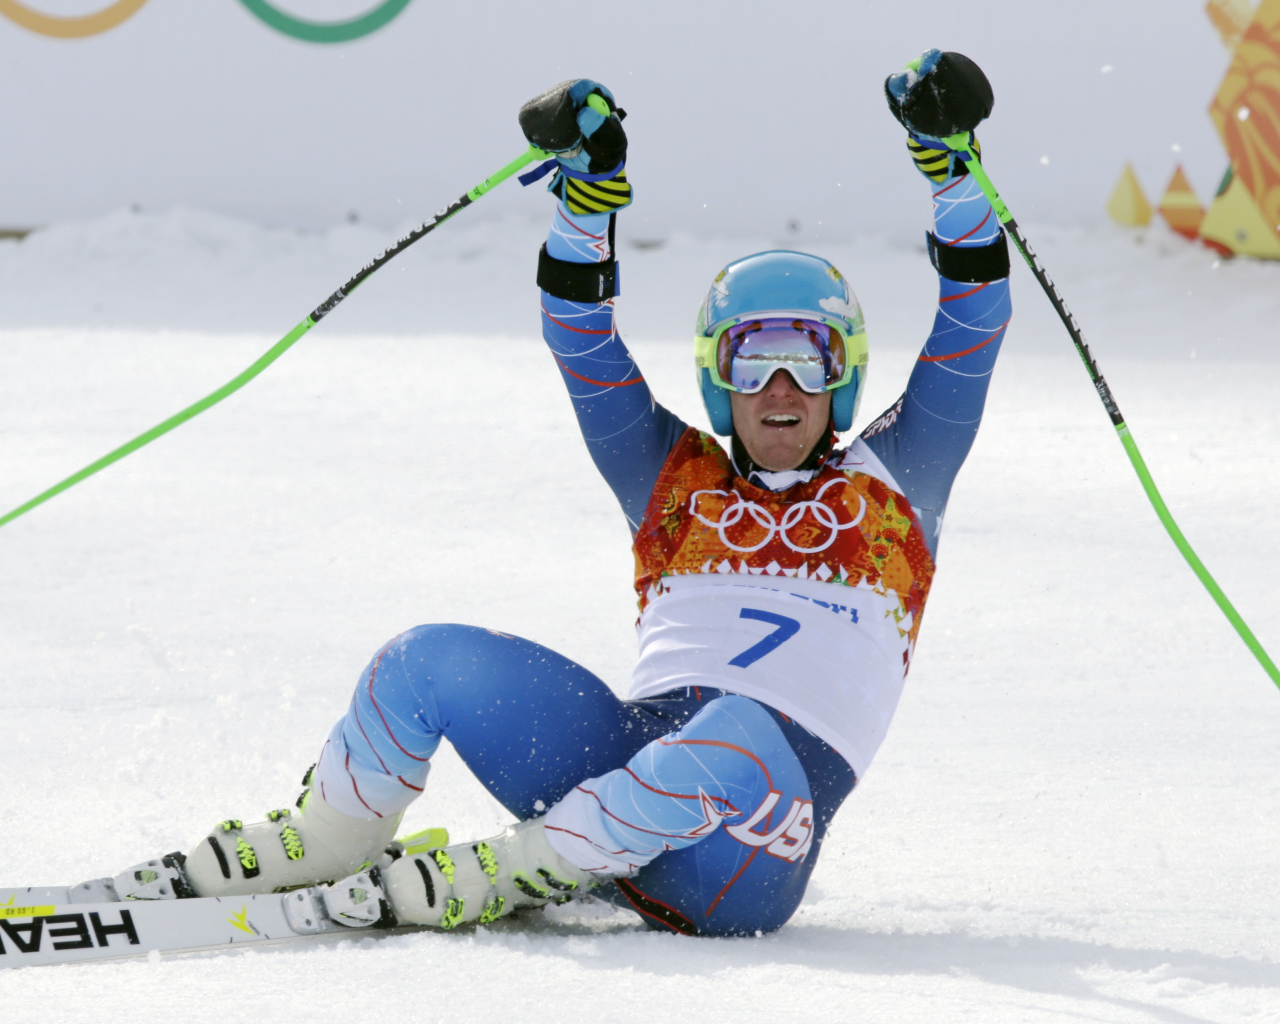 A gold medal in the discipline of skiing Ted Ligeti at the Olympics in Sochi